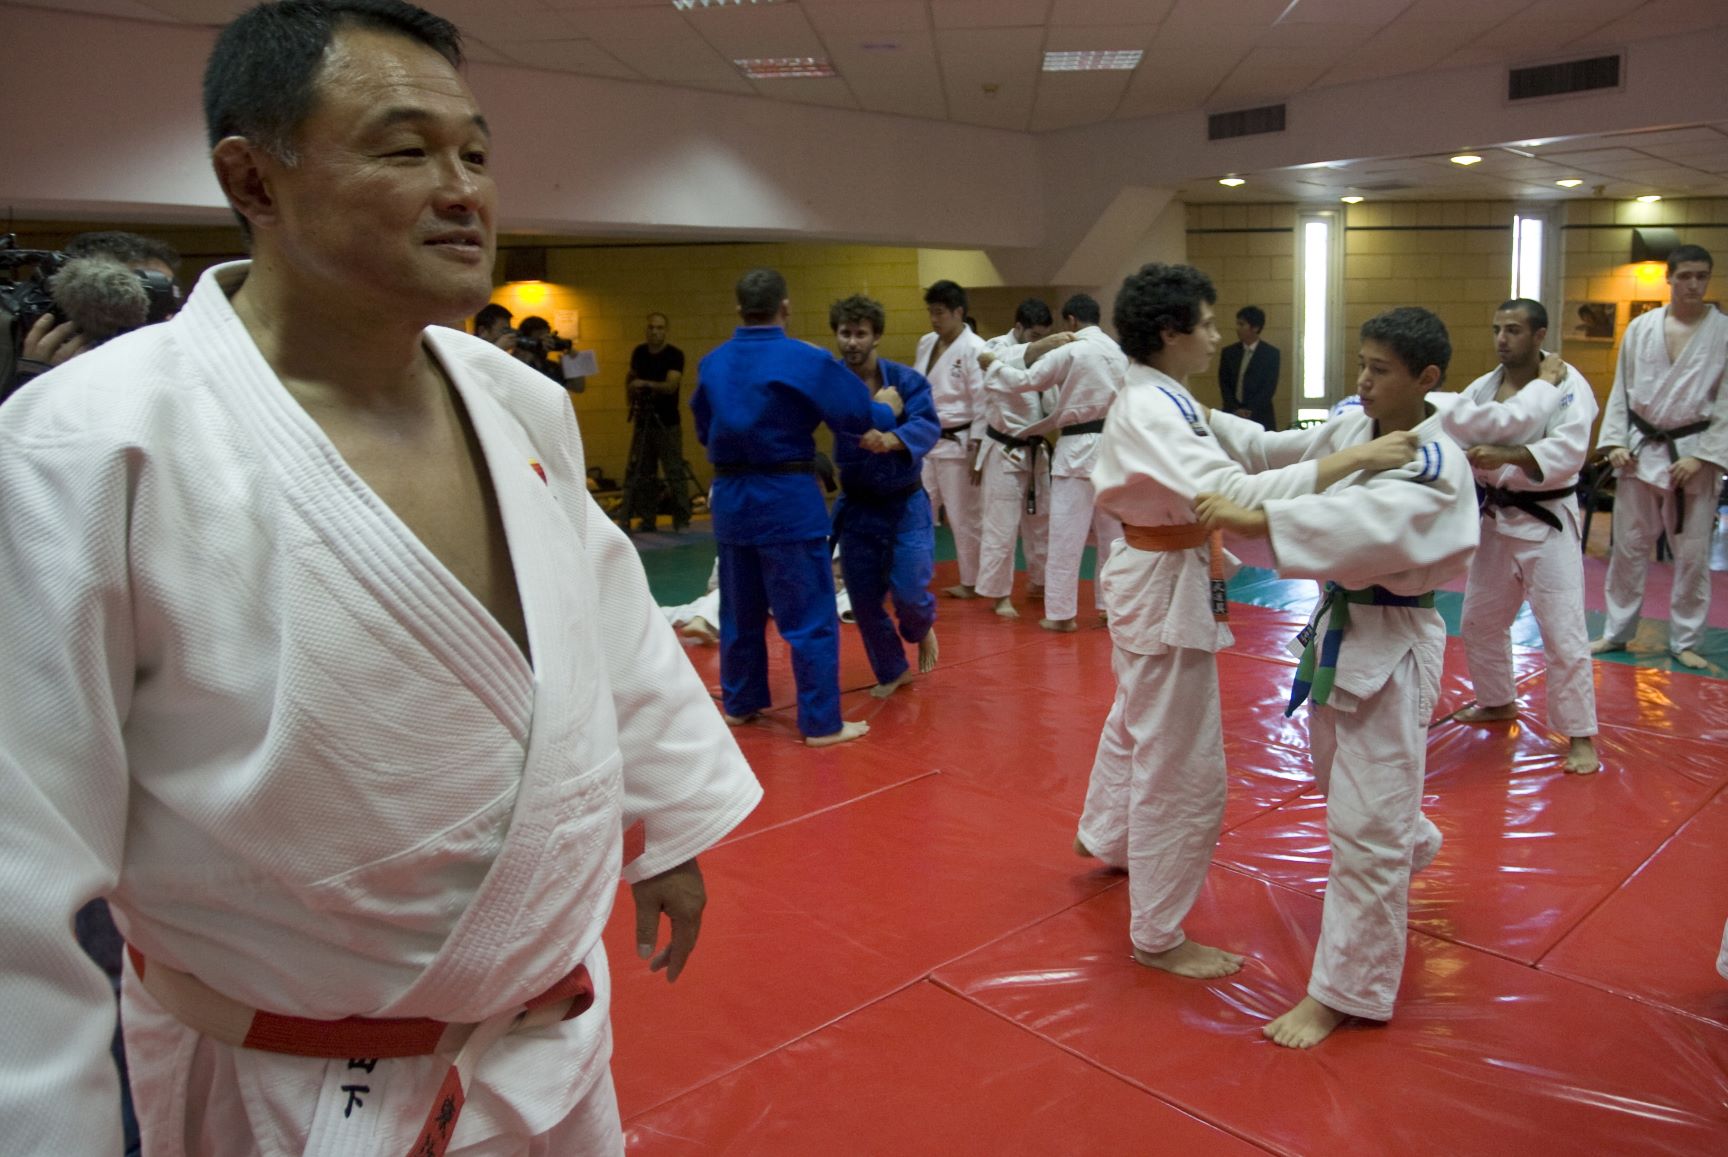 Japan's Judoka Yashiro Yamashita (L) gives a lecture as he teaches Judo techniques to Palestinian and Israeli students on July 21, 2010 in Jerusalem. (AFP)